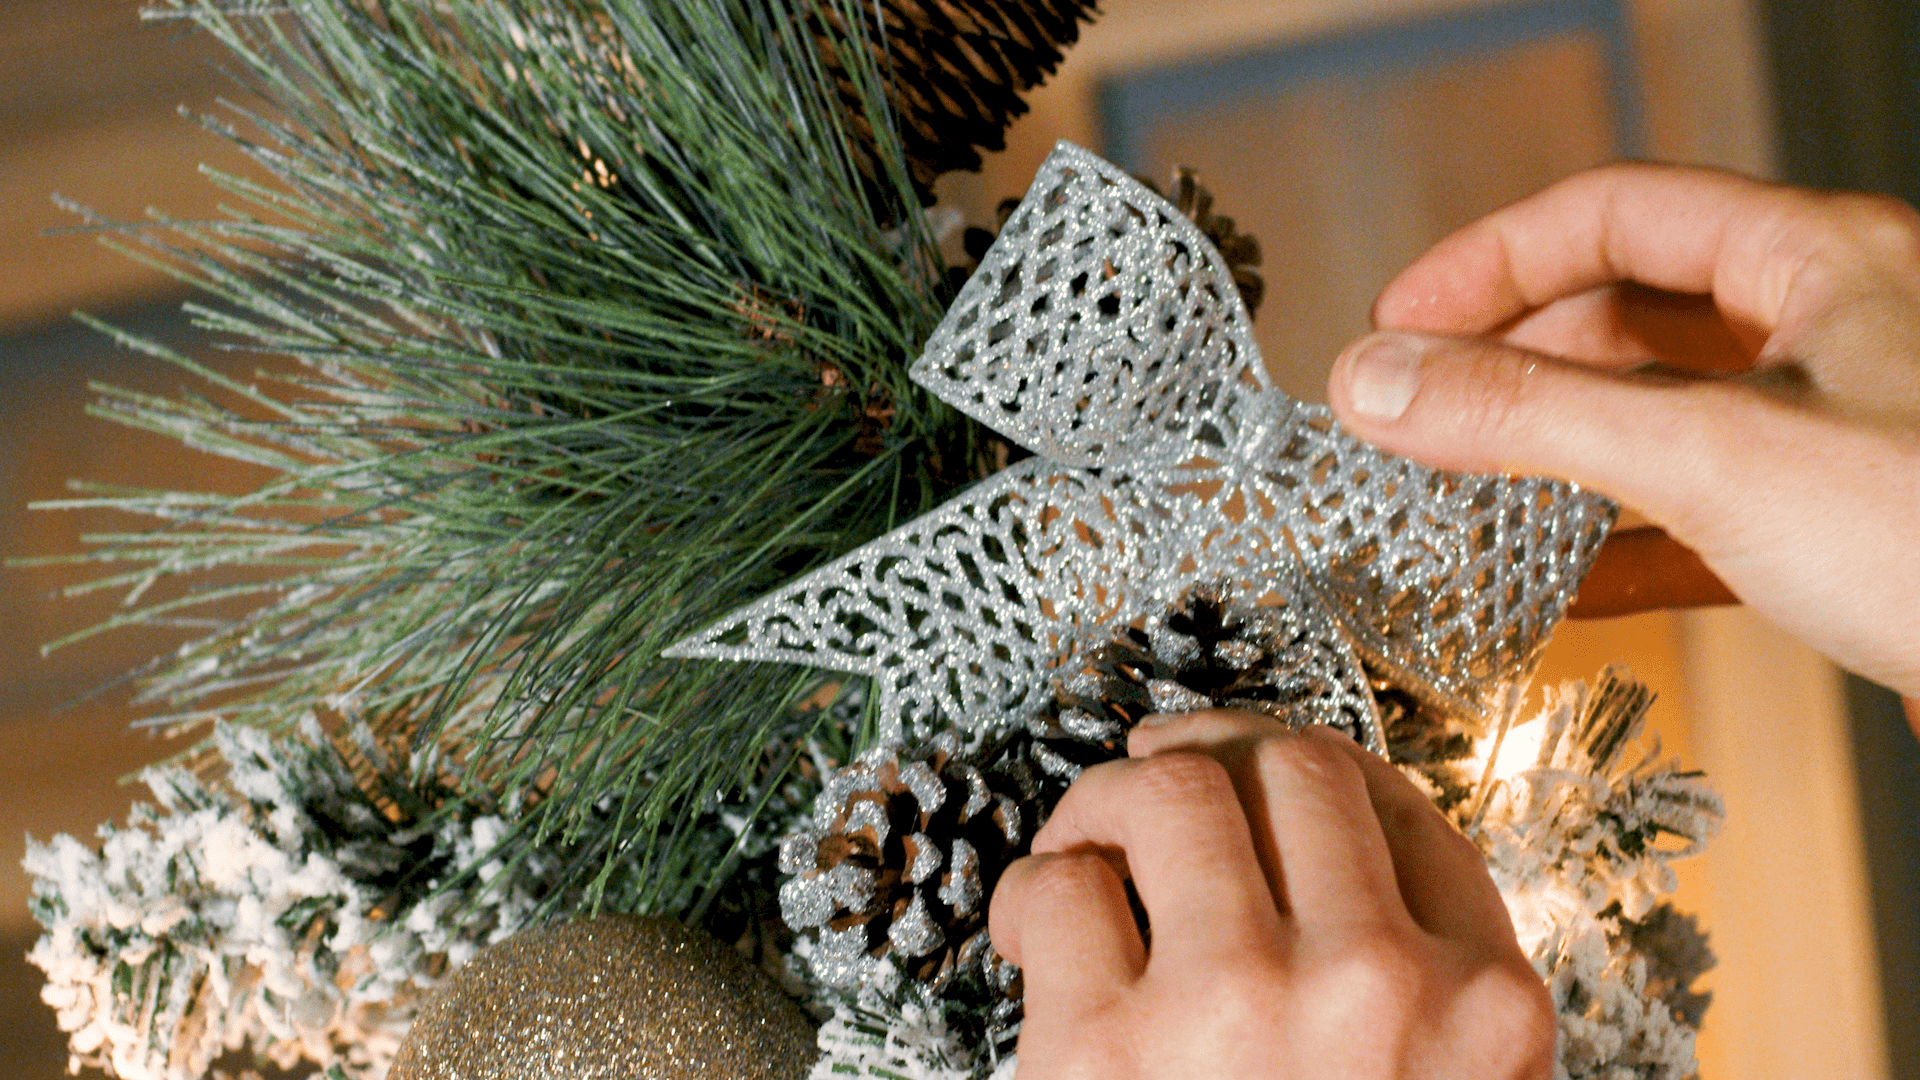 Lauren finalizes the christmas topper using pine needles and pine cones